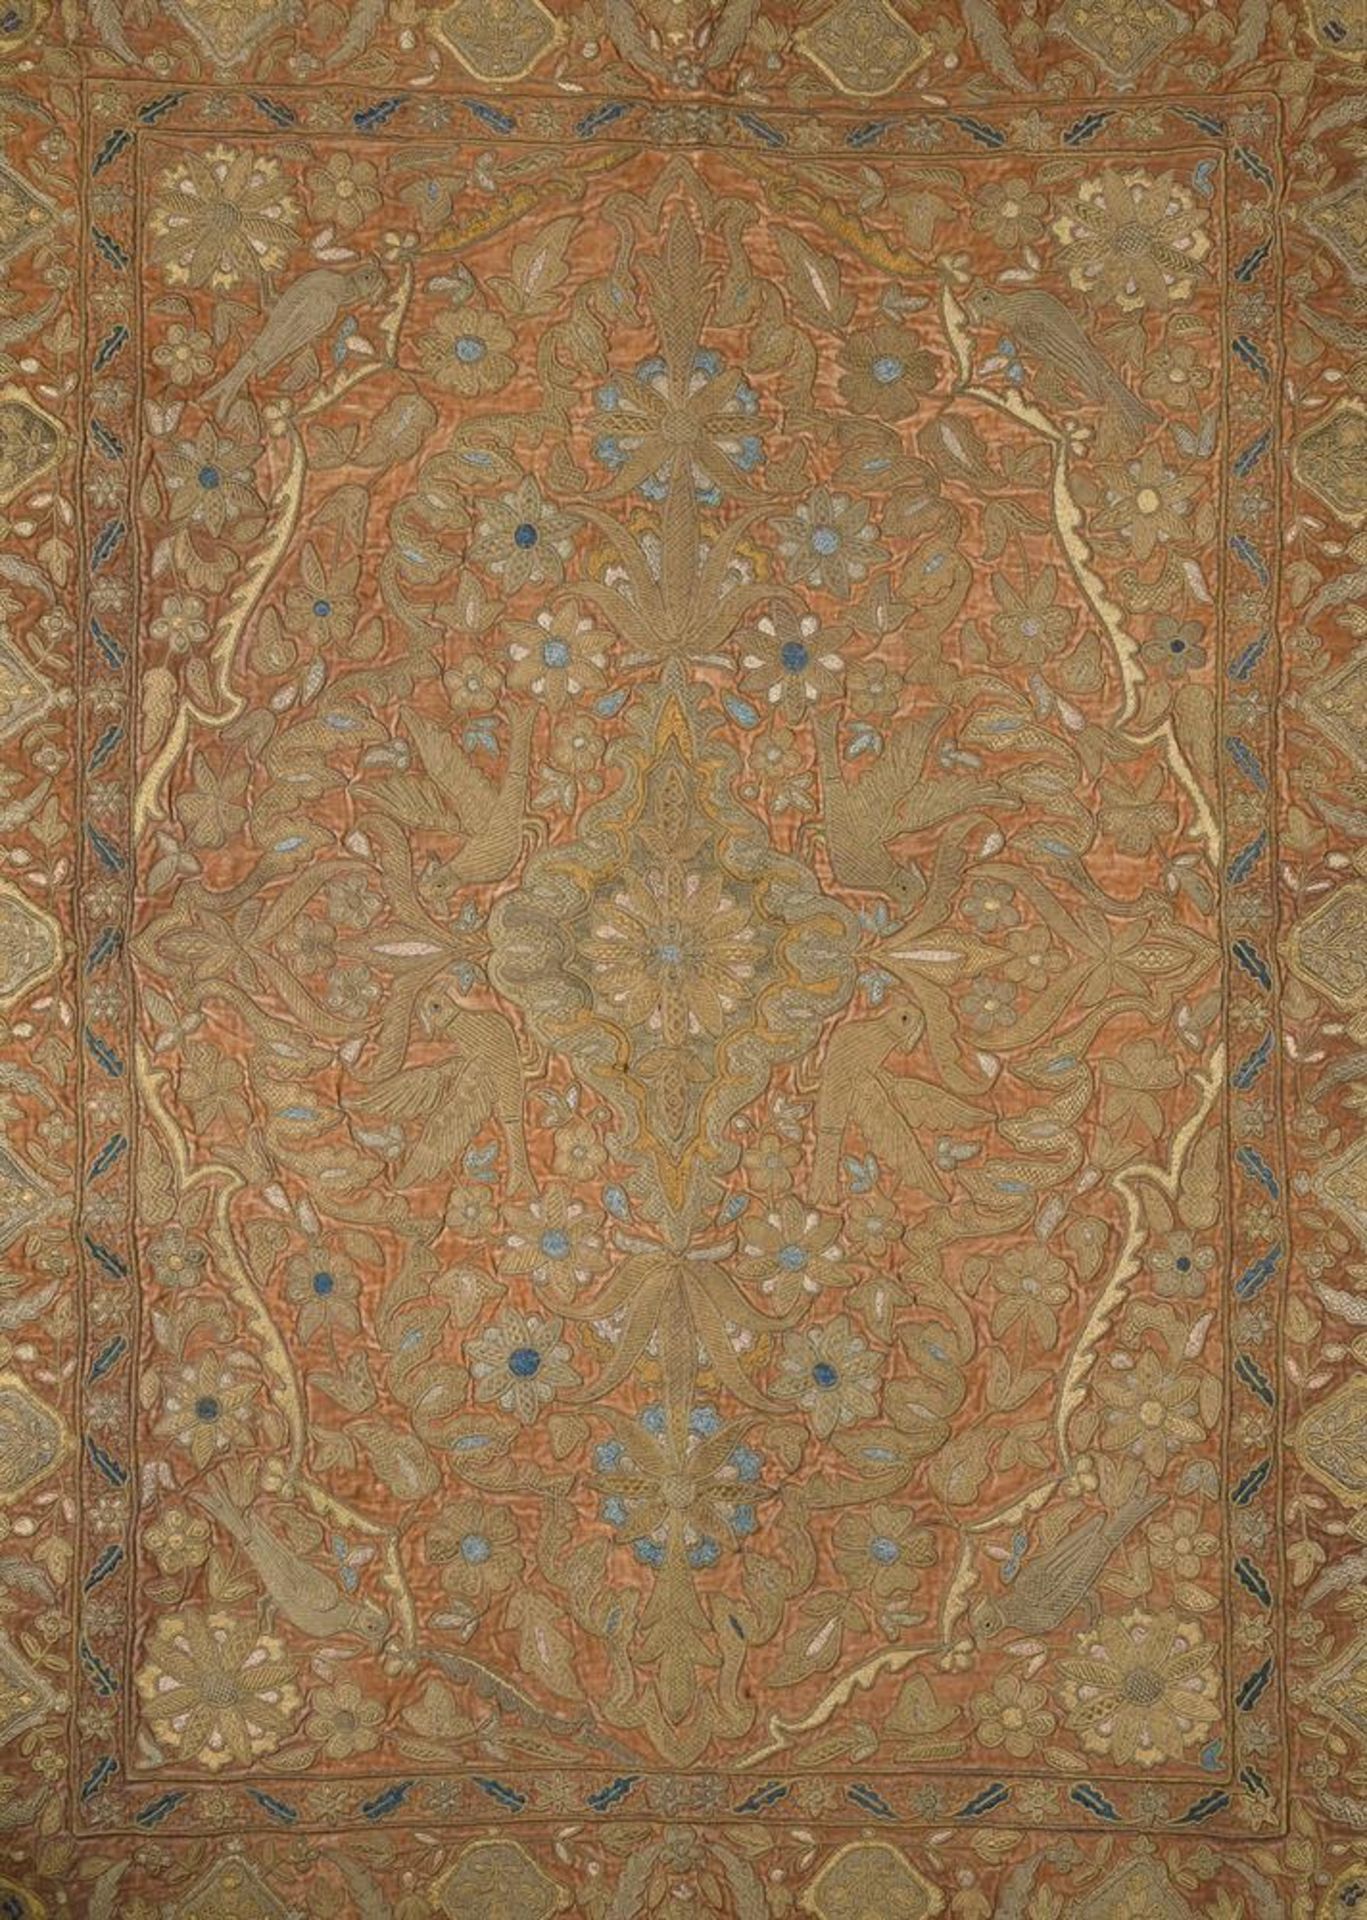 AN INDIAN FLORAL AND PARROT WOVEN TABLE COVER, 19TH CENTURY - Image 3 of 3